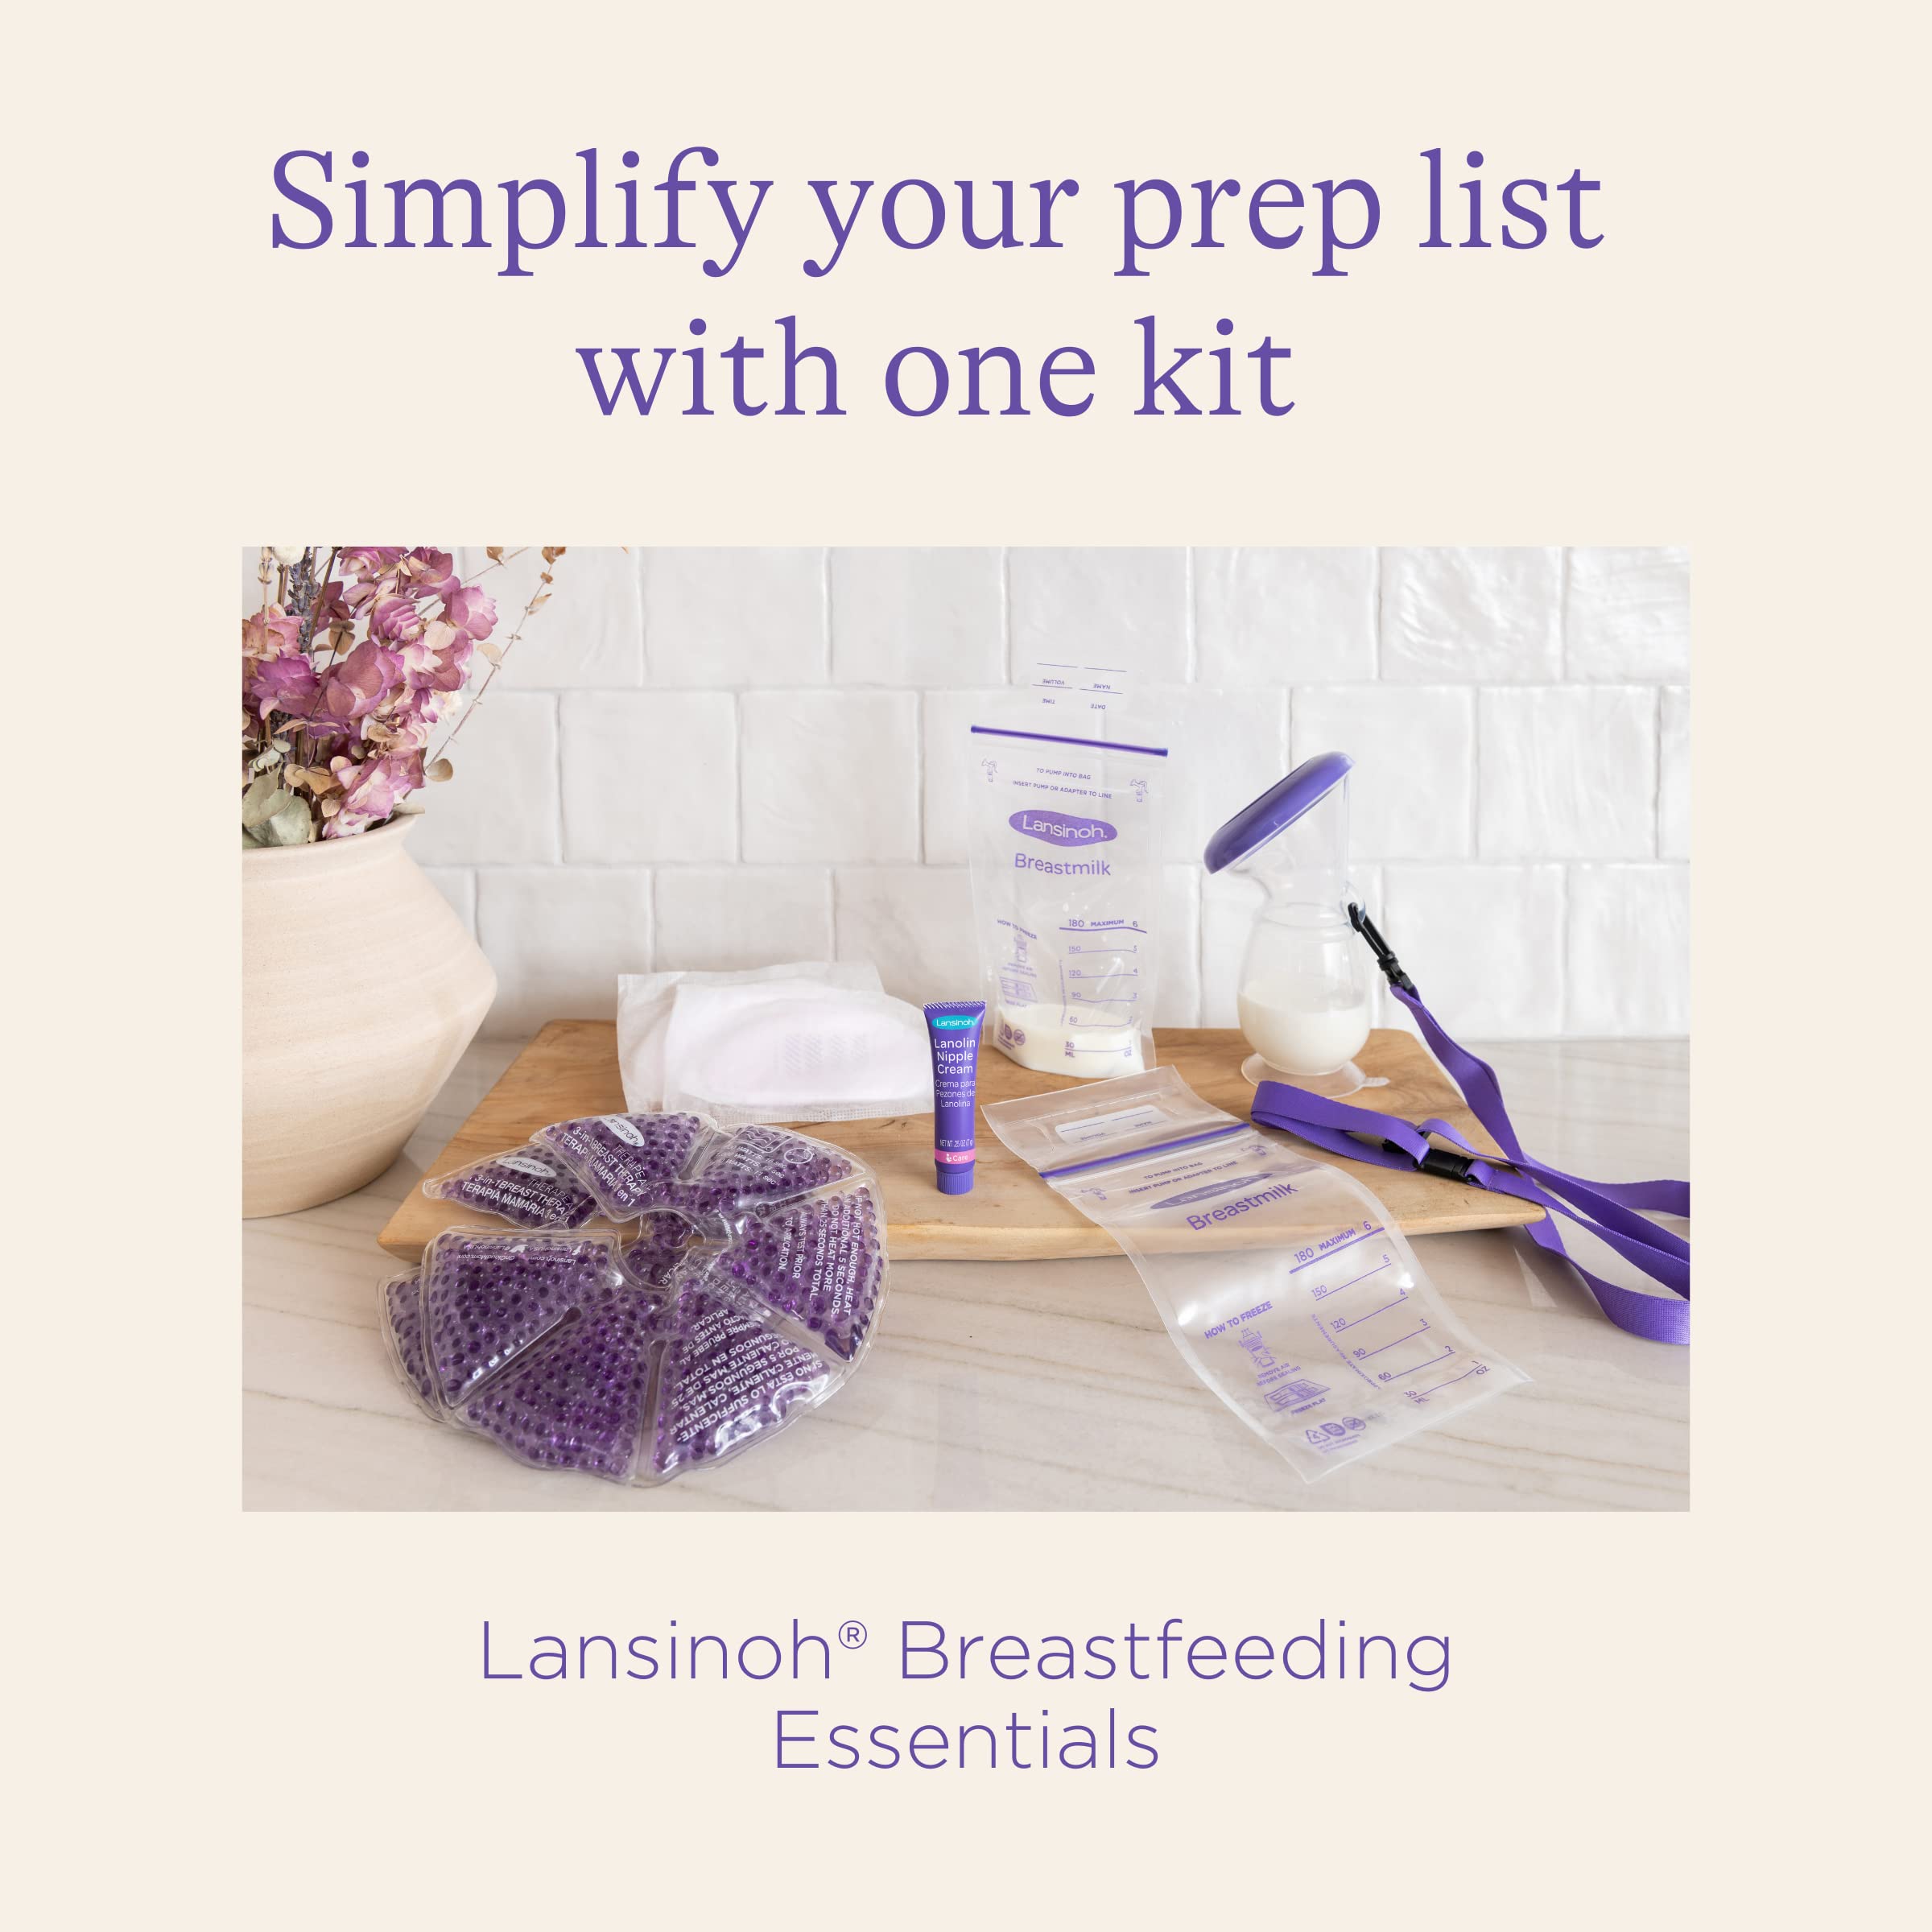 Lansinoh Breastfeeding Essentials for Nursing Moms: Nipple Cream, 48 Nursing Pads, 25 Breastmilk Storage Bags, 2 Hot & Cold Breast Therapy Packs, Silicone Breast Pump, 77 Pieces